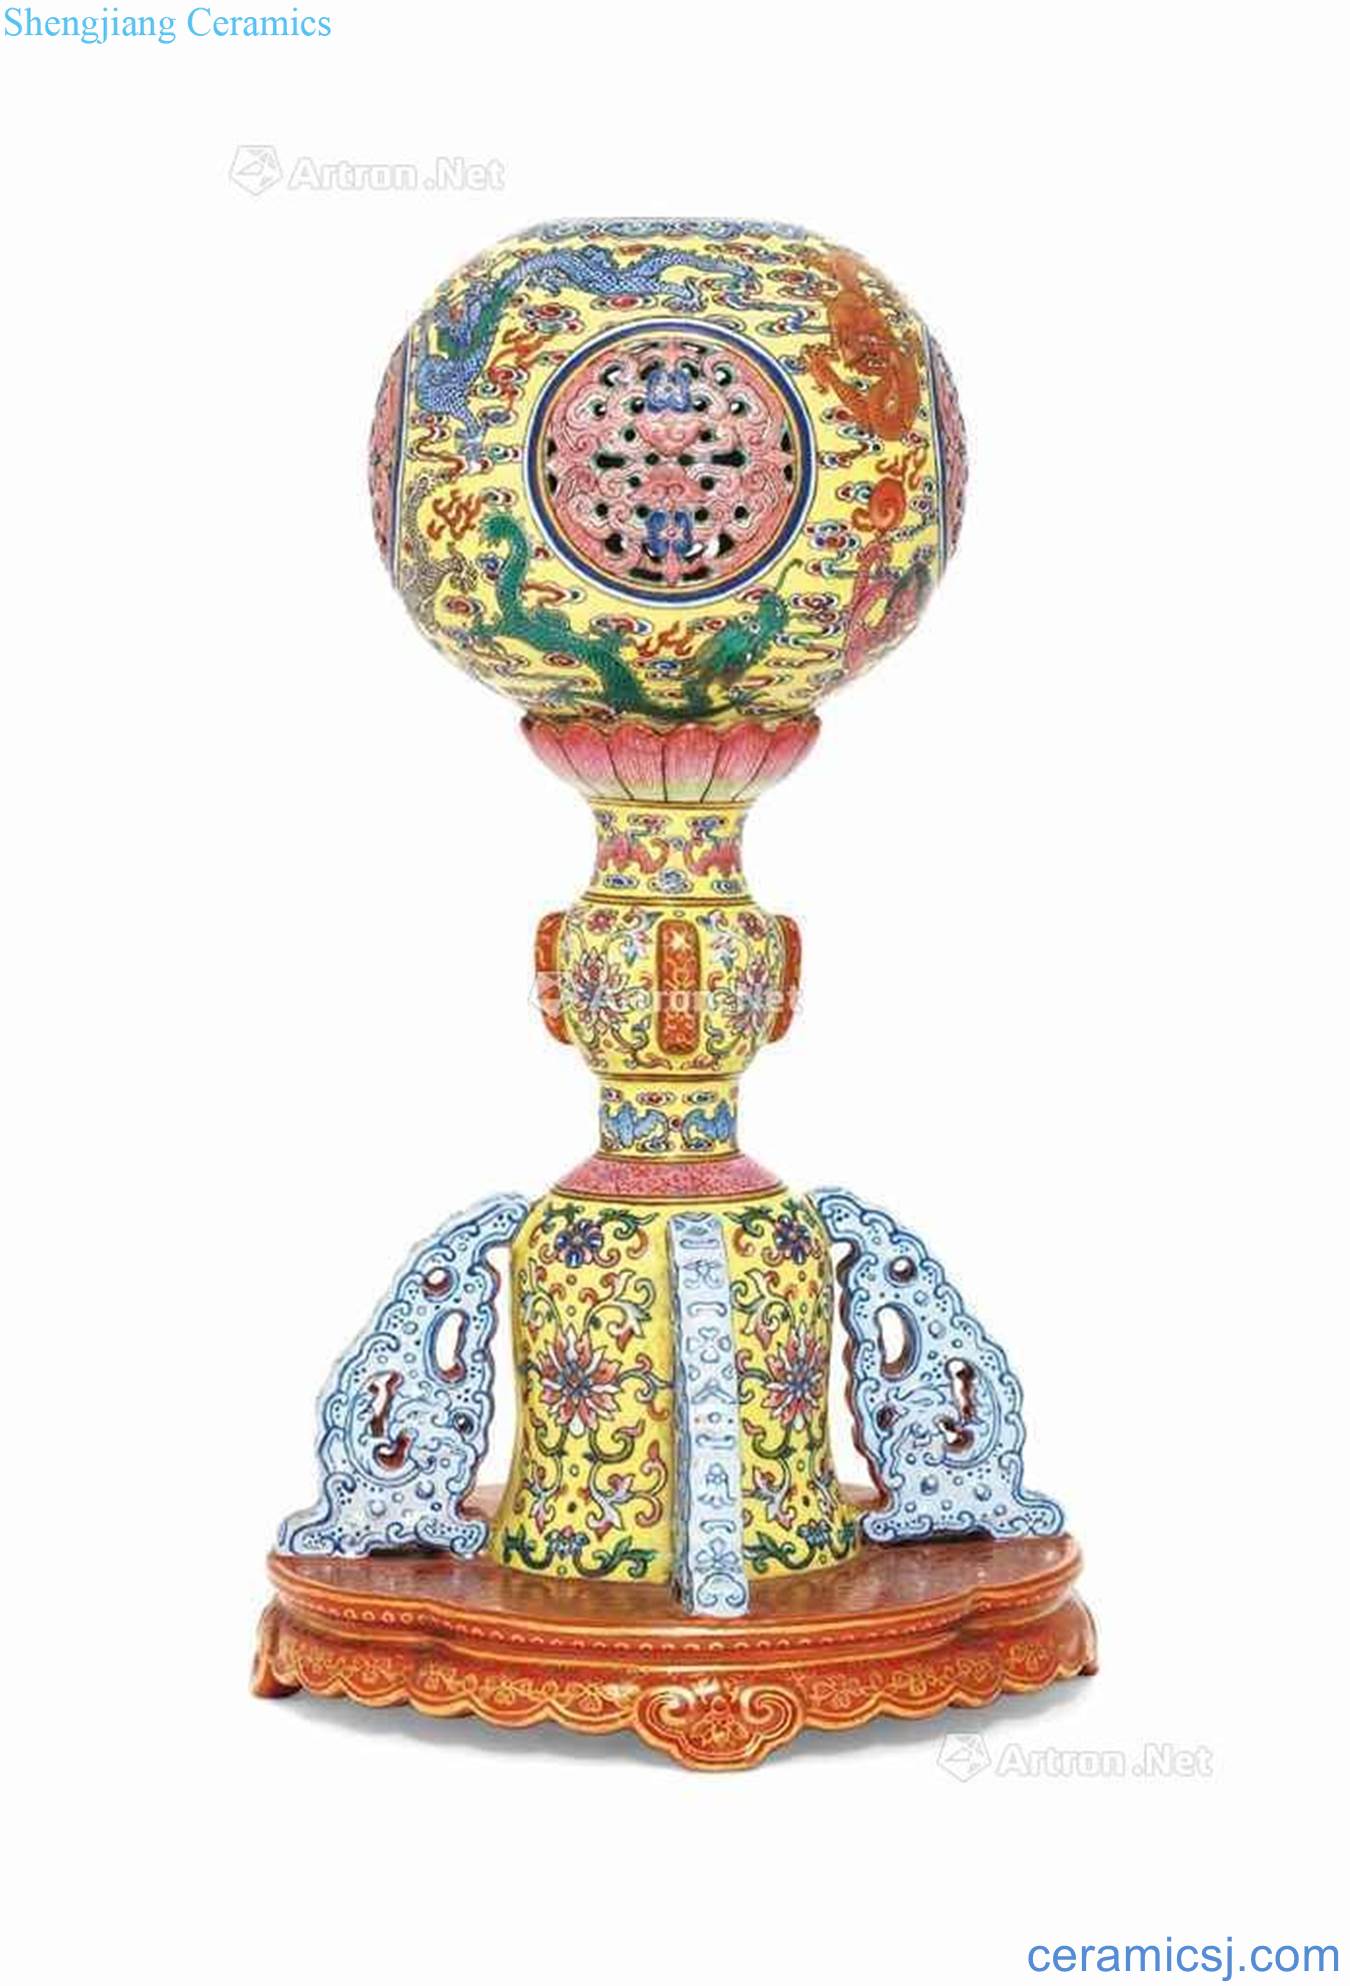 AN IMPERIAL 1821 ~ 1850 AND VERY RARE YELLOW - GROUND FAMILLE ROSE 'NINE DRAGONS' HAT STAND